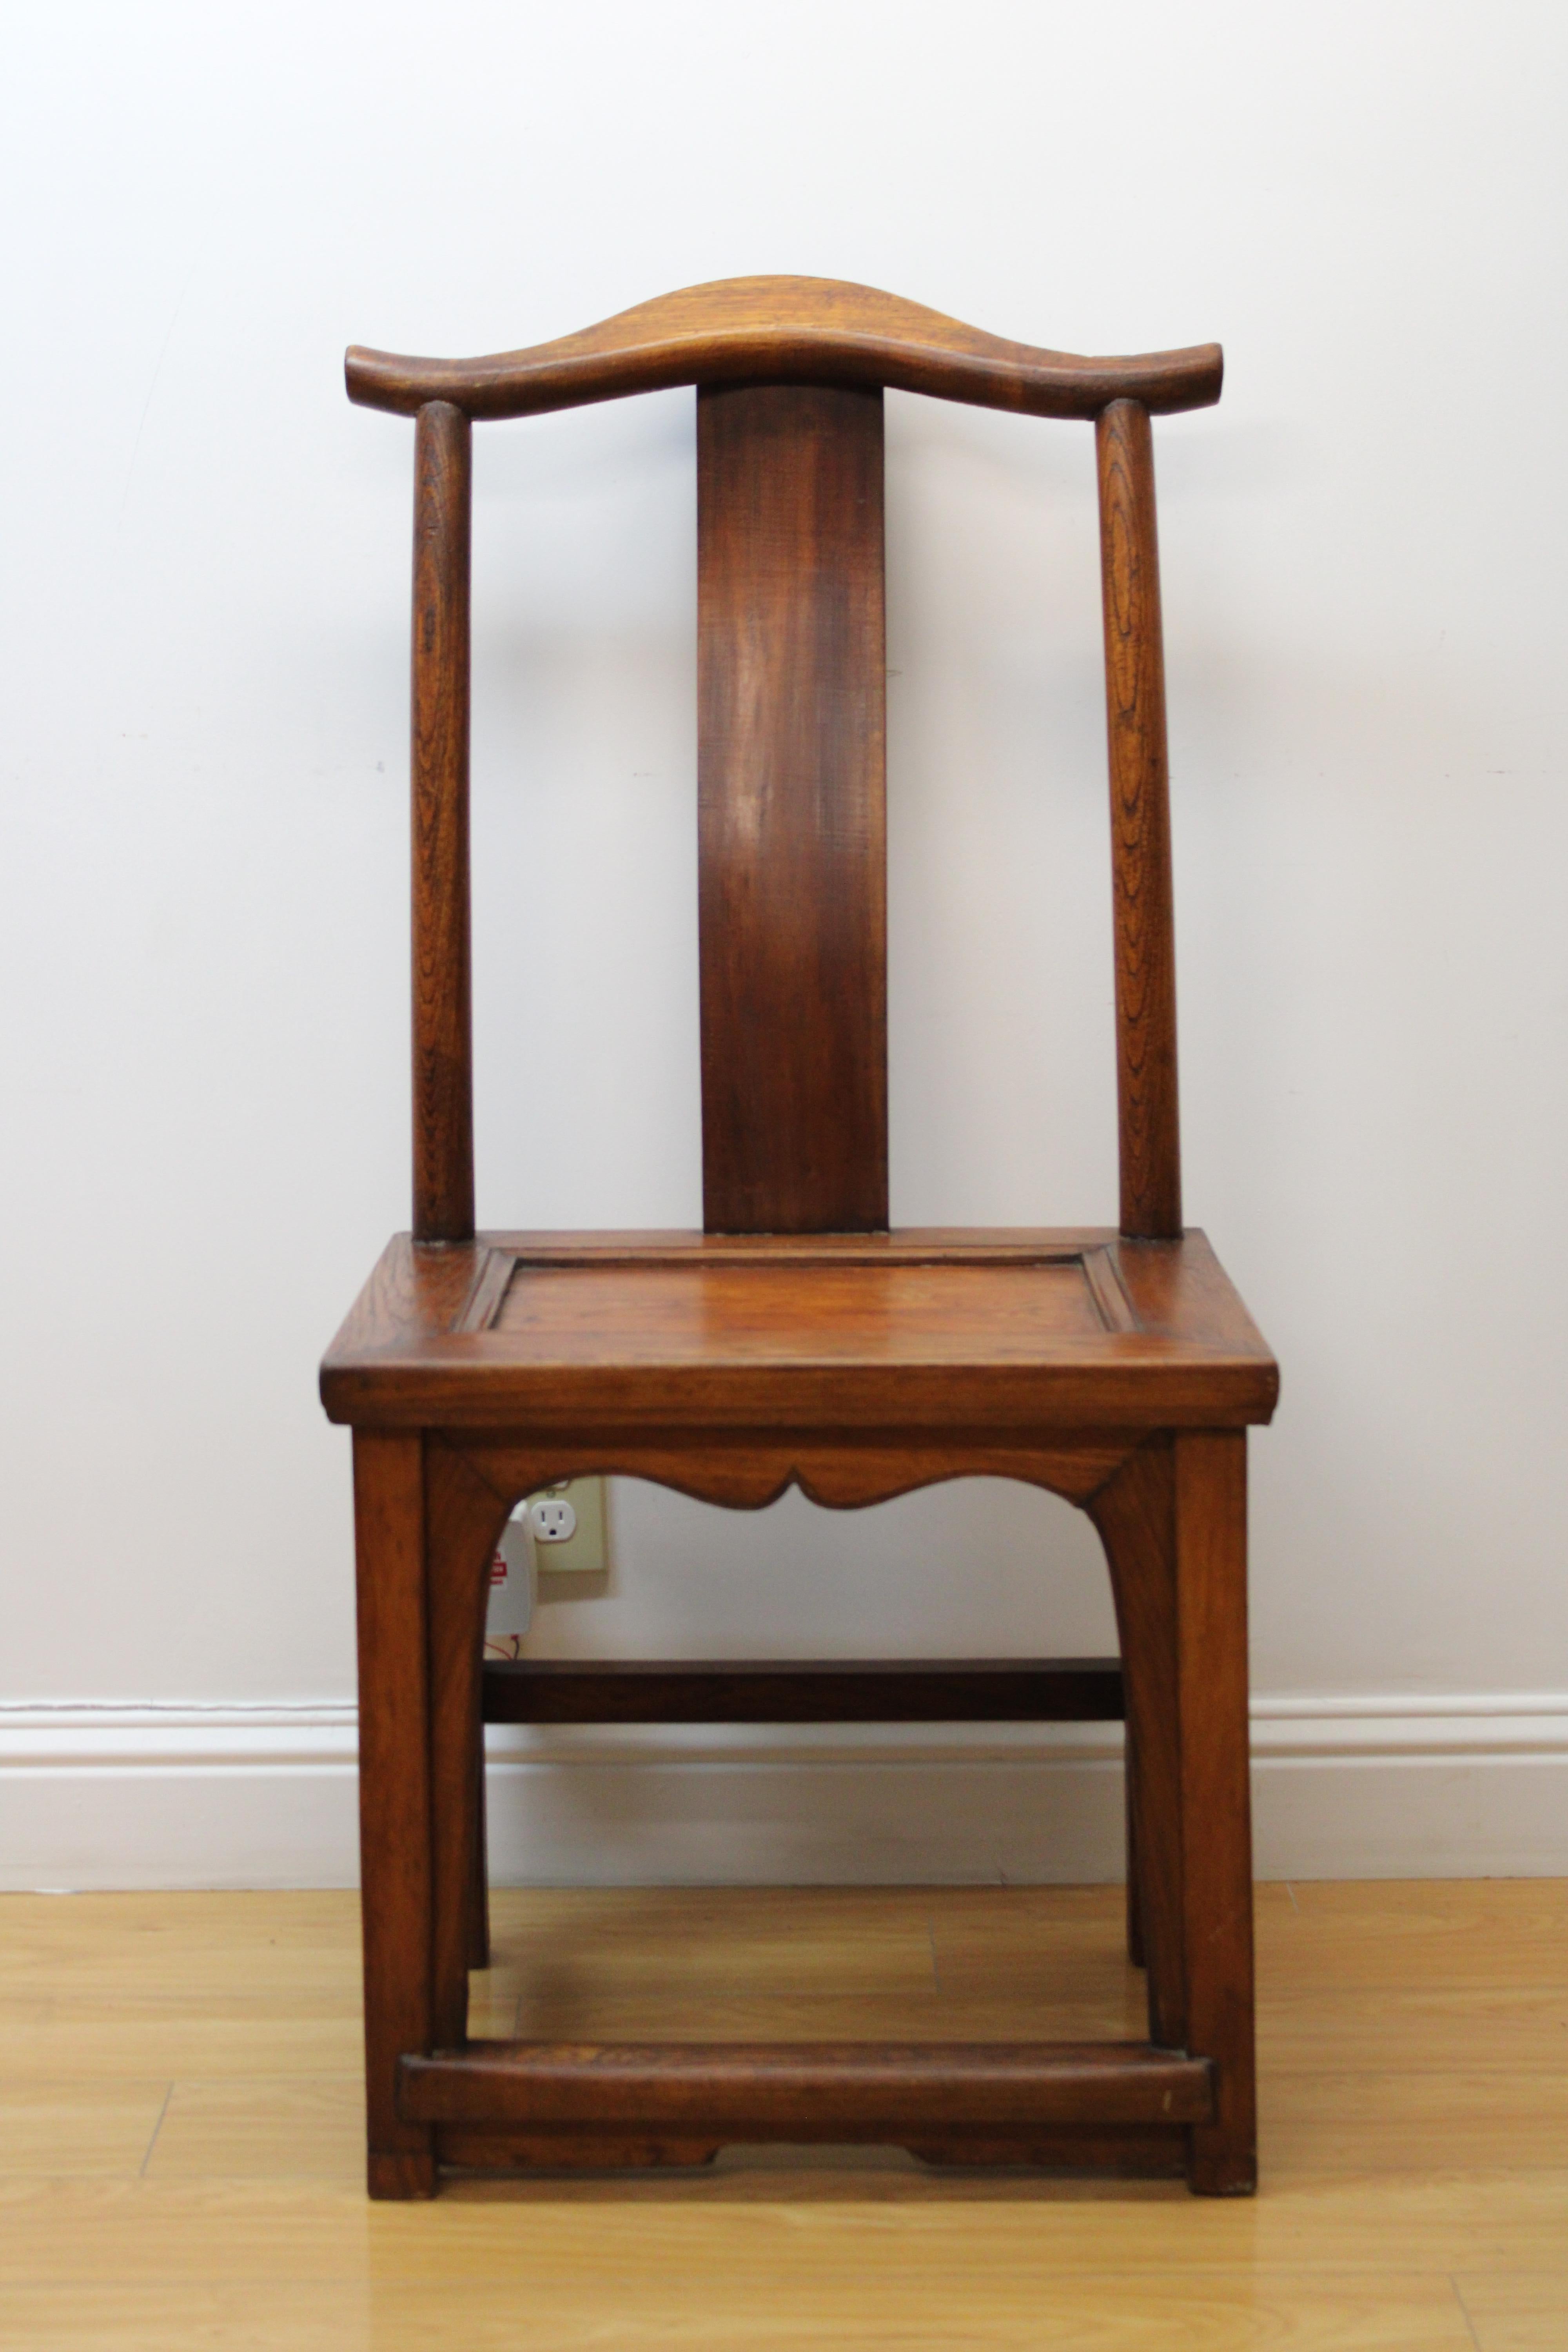 C. Mid 20th Century

Pair of Asian Carved Hardwood Side Chairs.